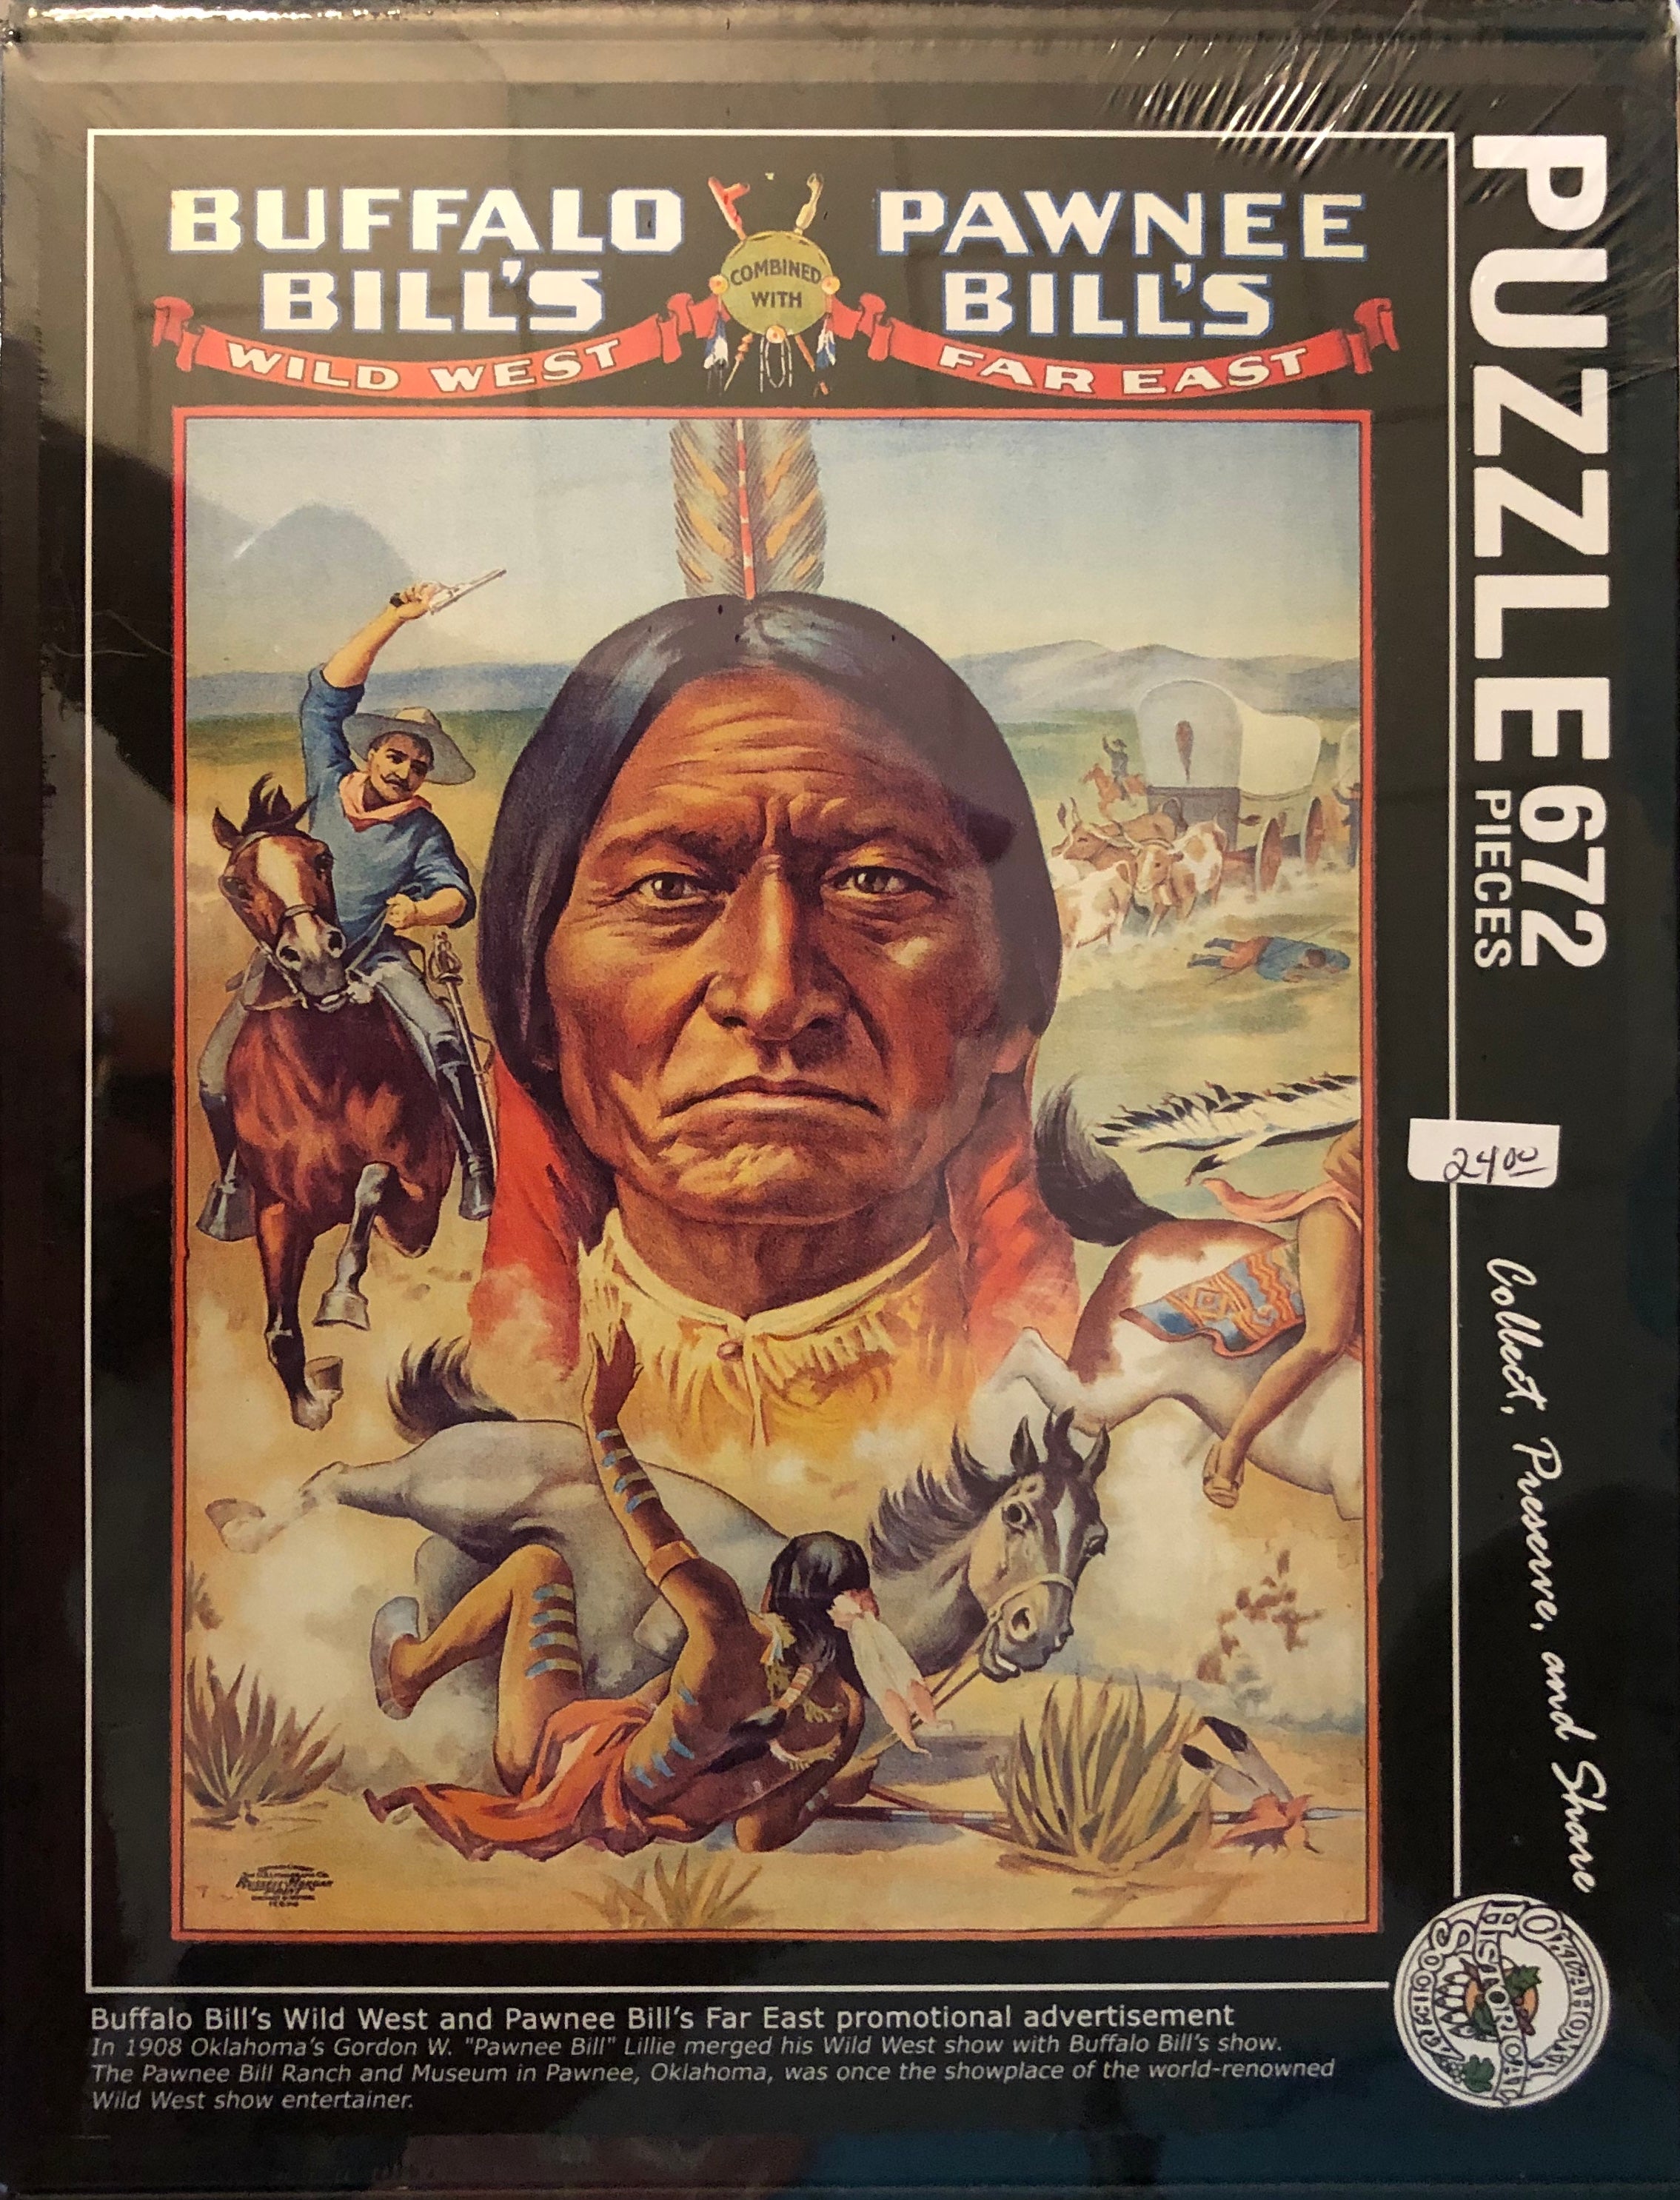 Puzzle of Buffalo Bill's Wild West and Pawnee Bill's Far East